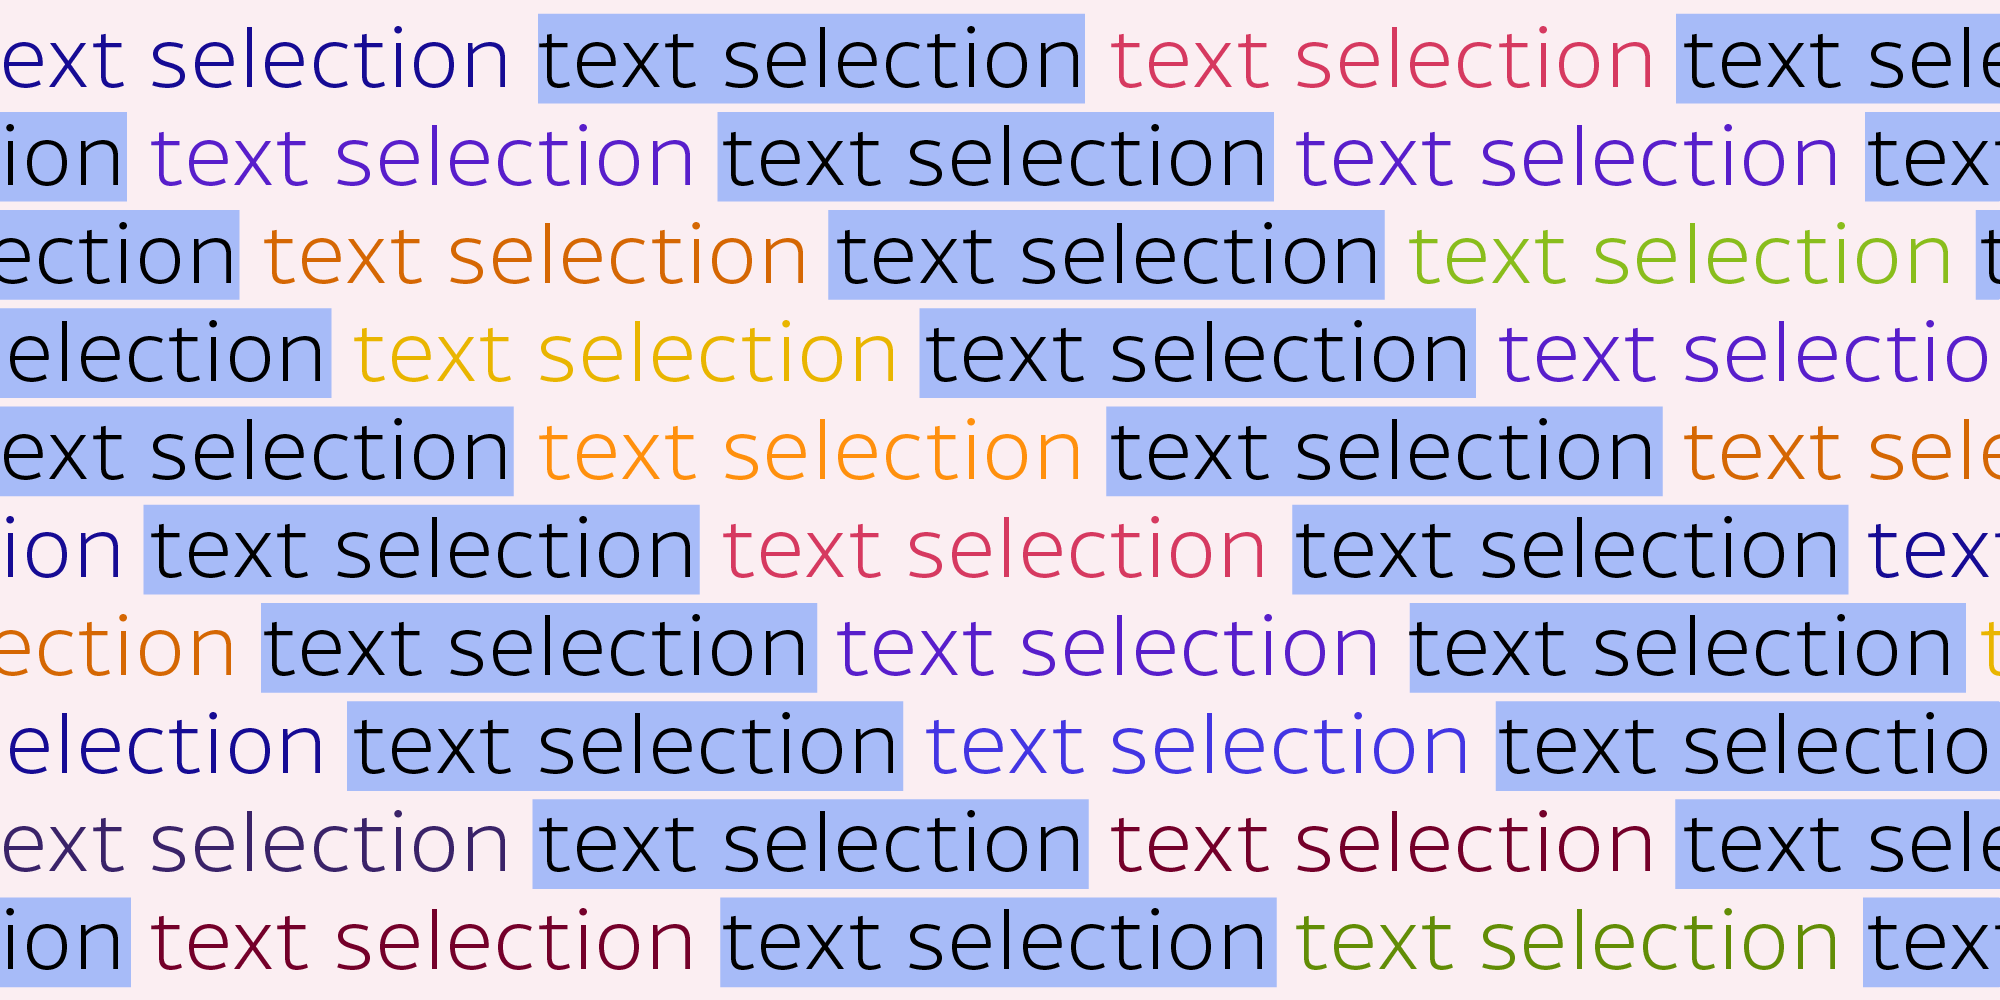 Illustration: Text Selection Regression in Chrome 83